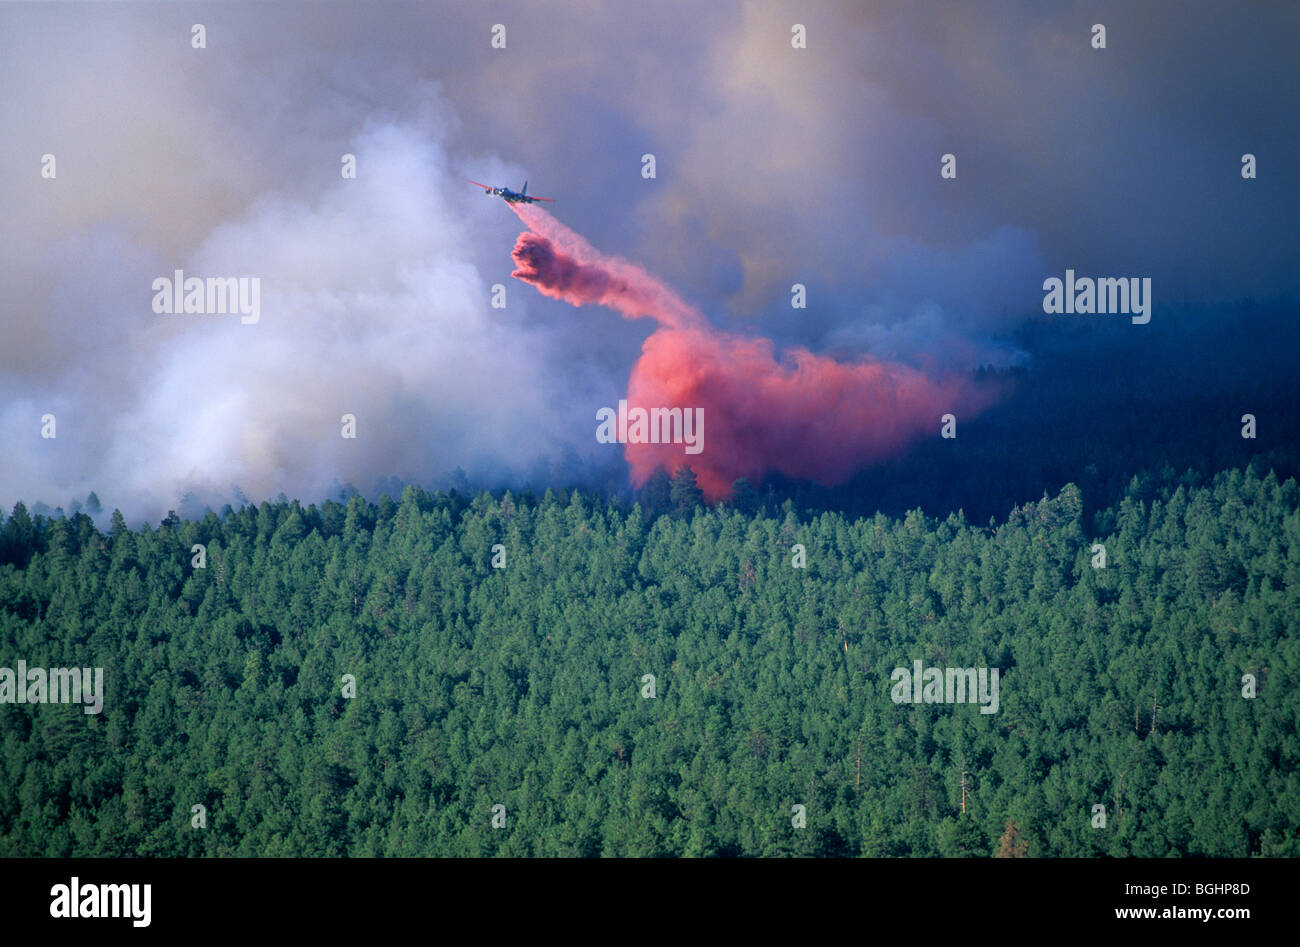 Air tanker plane drops slurry on forest fire, Leroux Fire, Coconino National Forest, near Flagstaff, Arizona Stock Photo